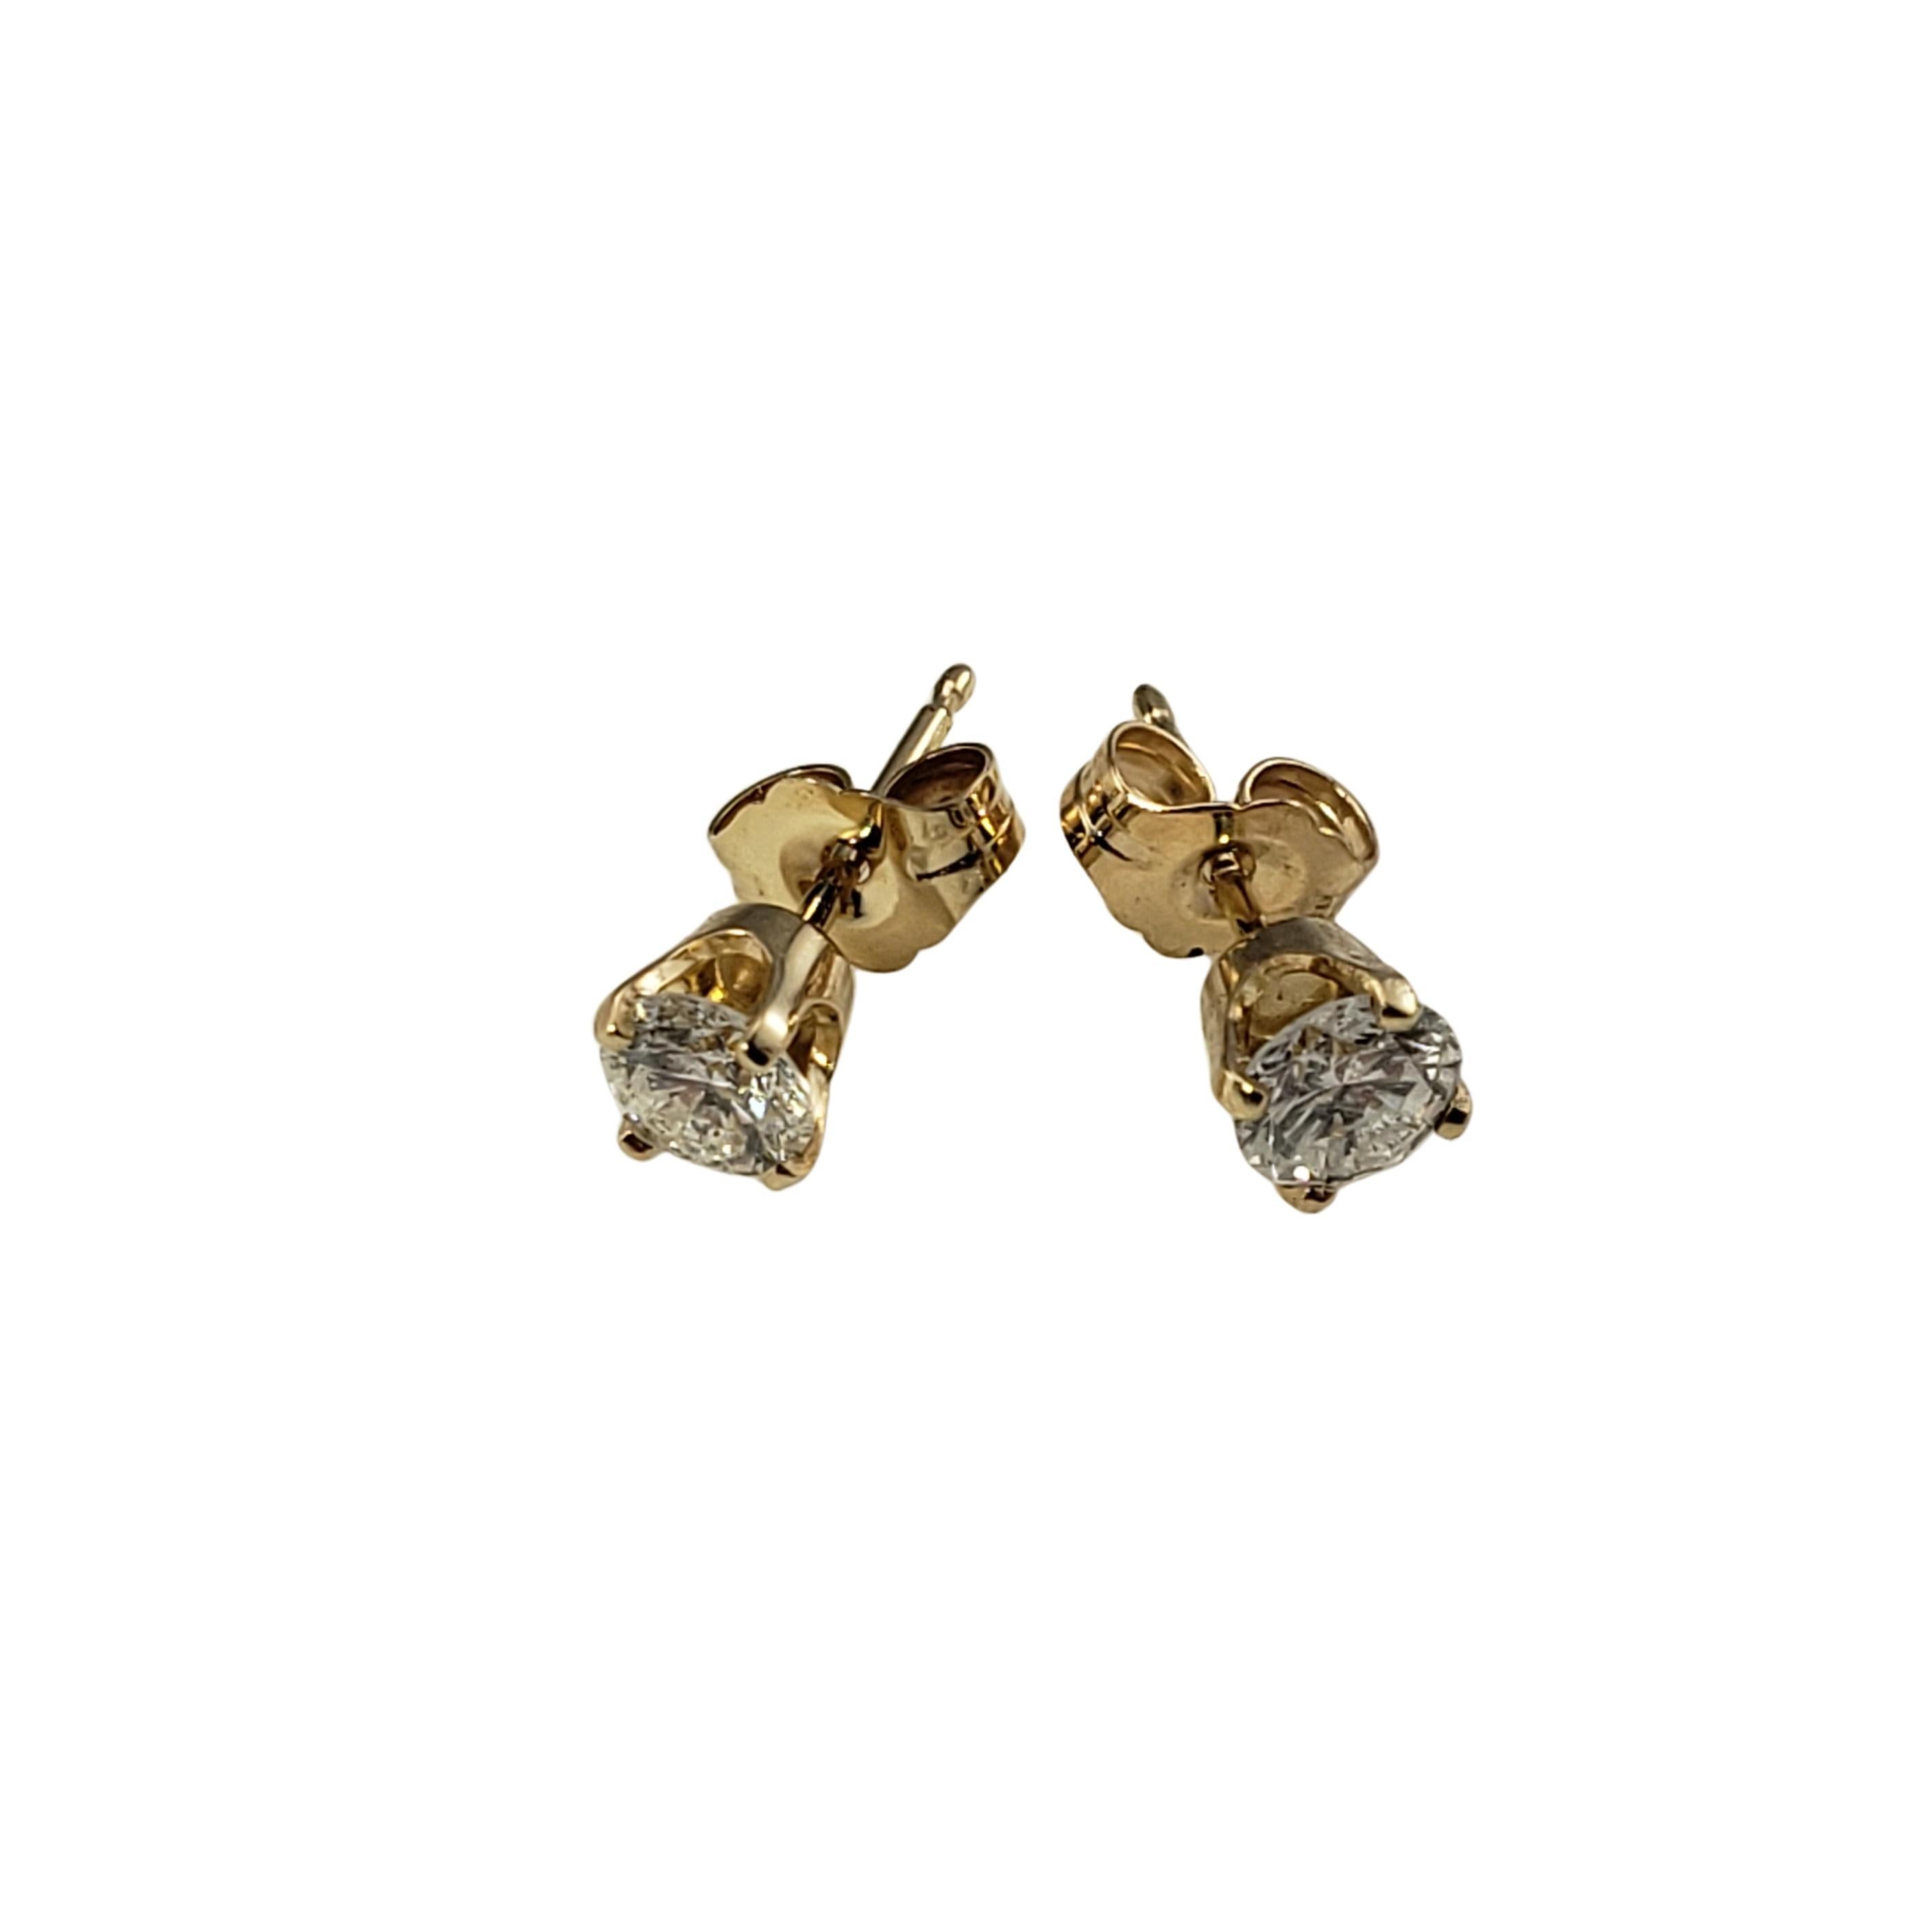 Vintage 14 Karat Yellow Gold Diamond Stud Earrings .60 TCW.-

These sparkling earrings each feature one round brilliant cut diamond set in classic 14K yellow gold.  Push back closures.

Approximate total diamond weight:  .60 ct.

Diamond color: